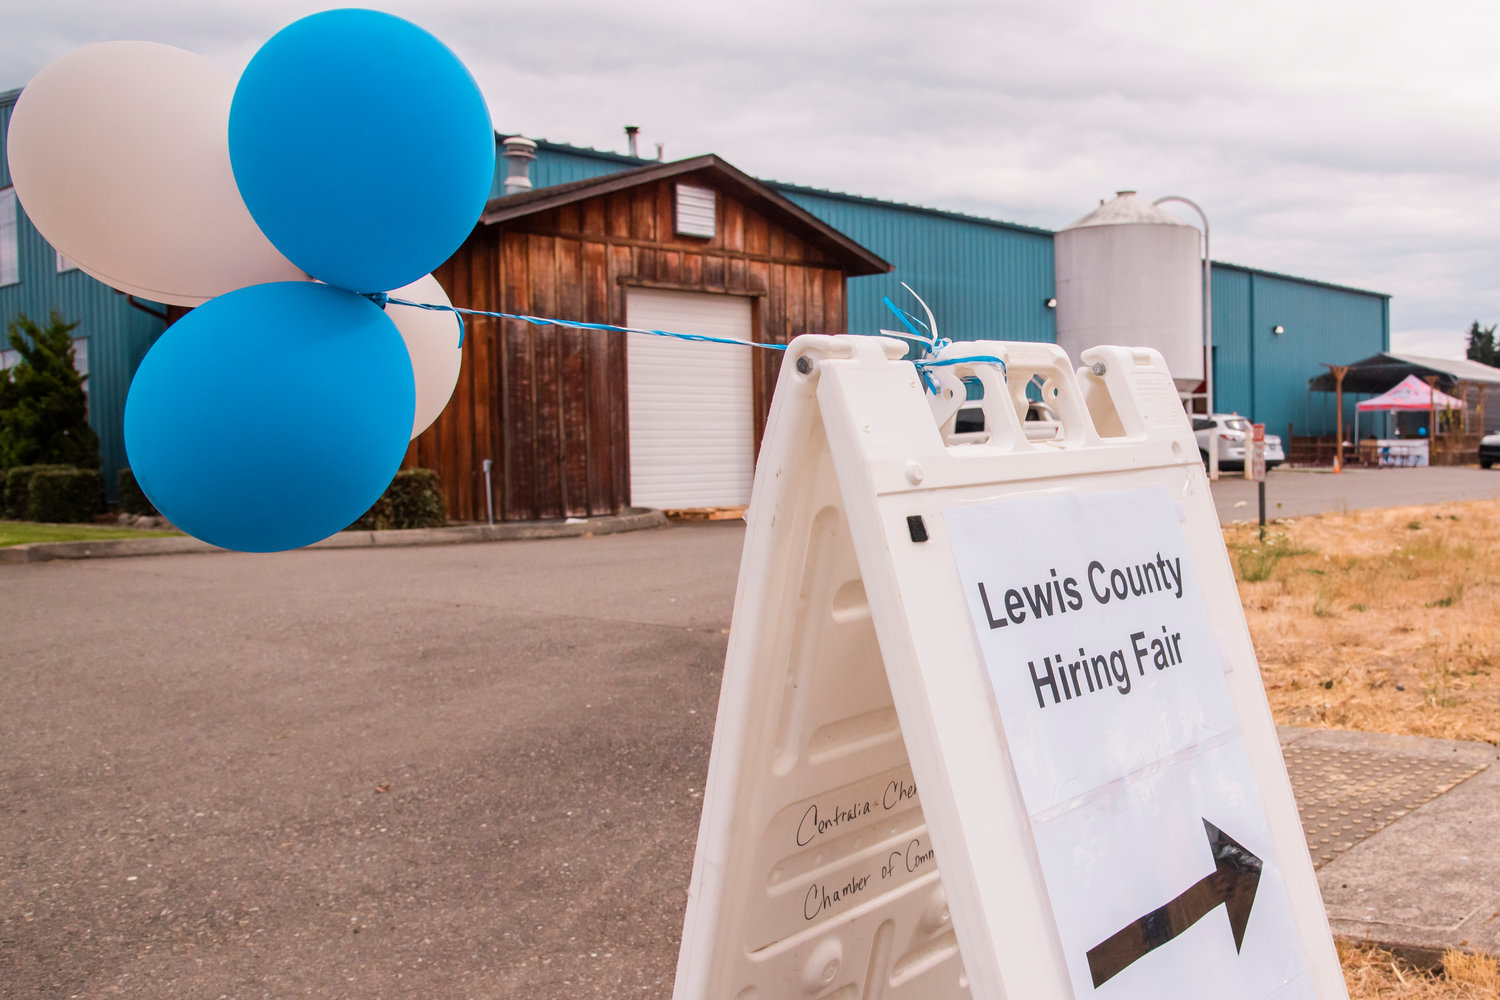 Balloons blow in the wind during a Lewis County Hiring Fair at Dick's Brewing in Centralia last year.